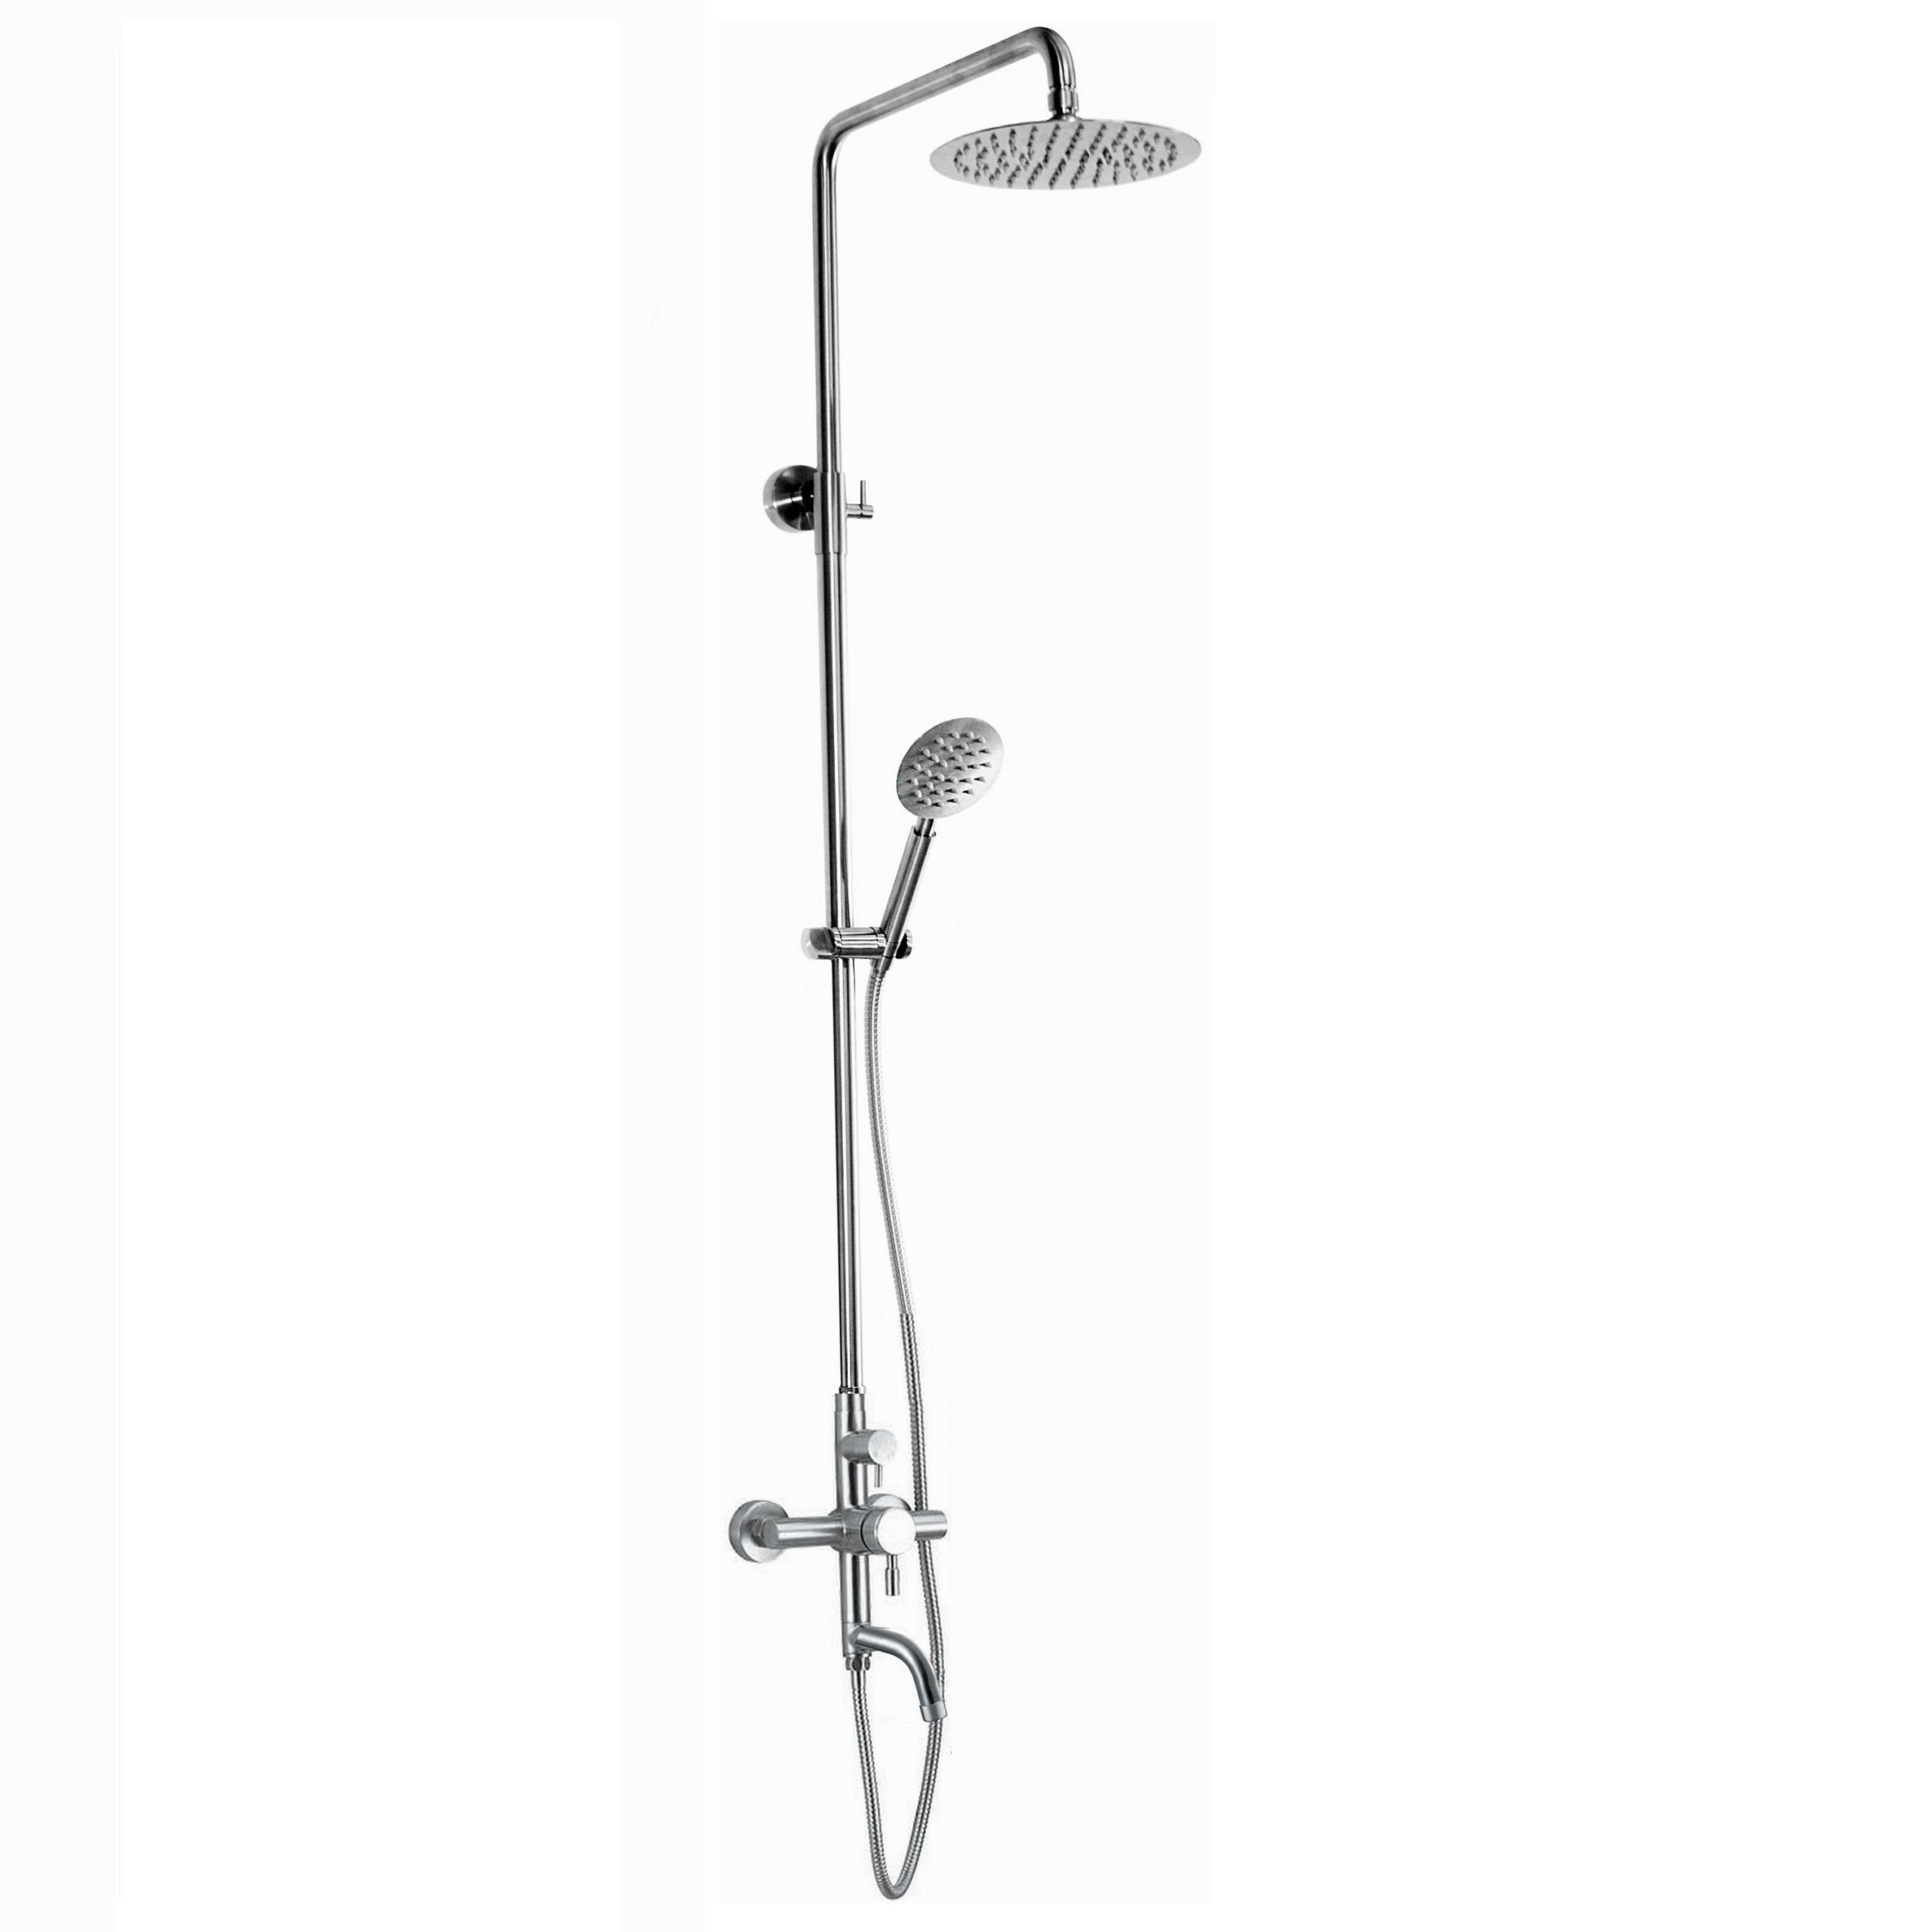 Outdoor Shower Company Wall Mount Hot & Cold Shower - Lever Handle Valve